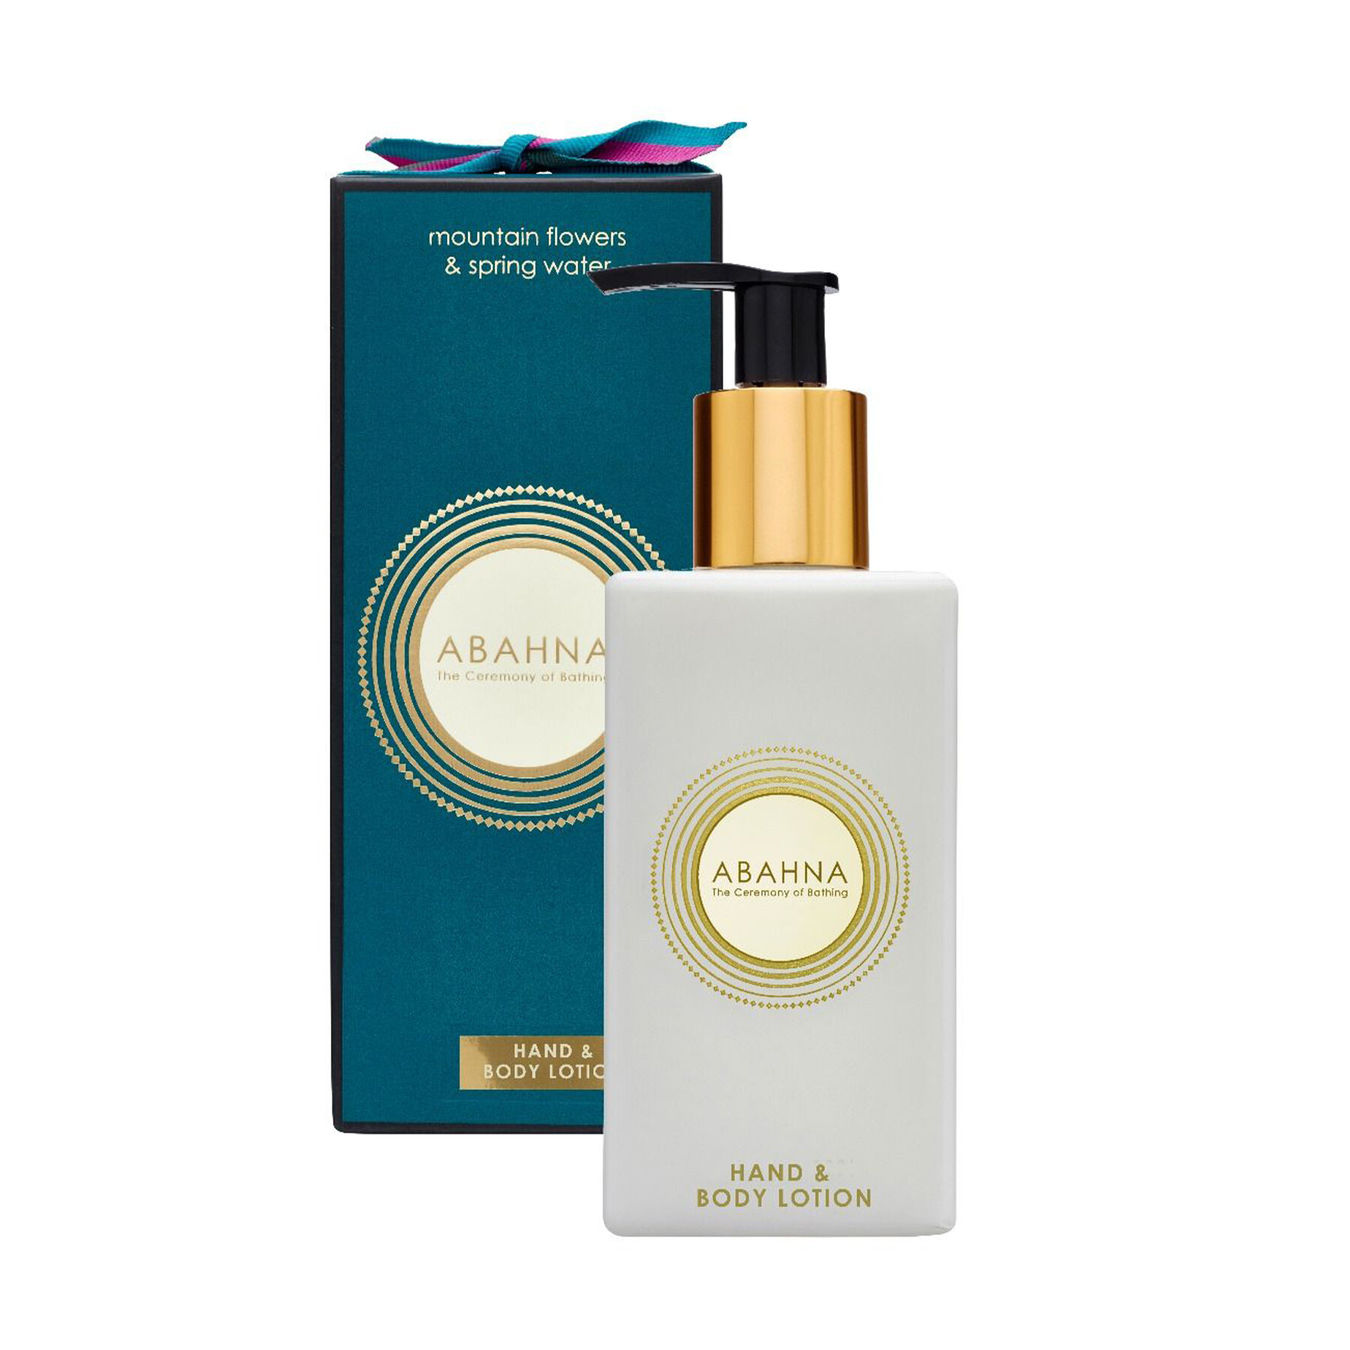 ABAHNA Mountain Flowers & Spring Water Hand & Body Lotion 250ml Femme